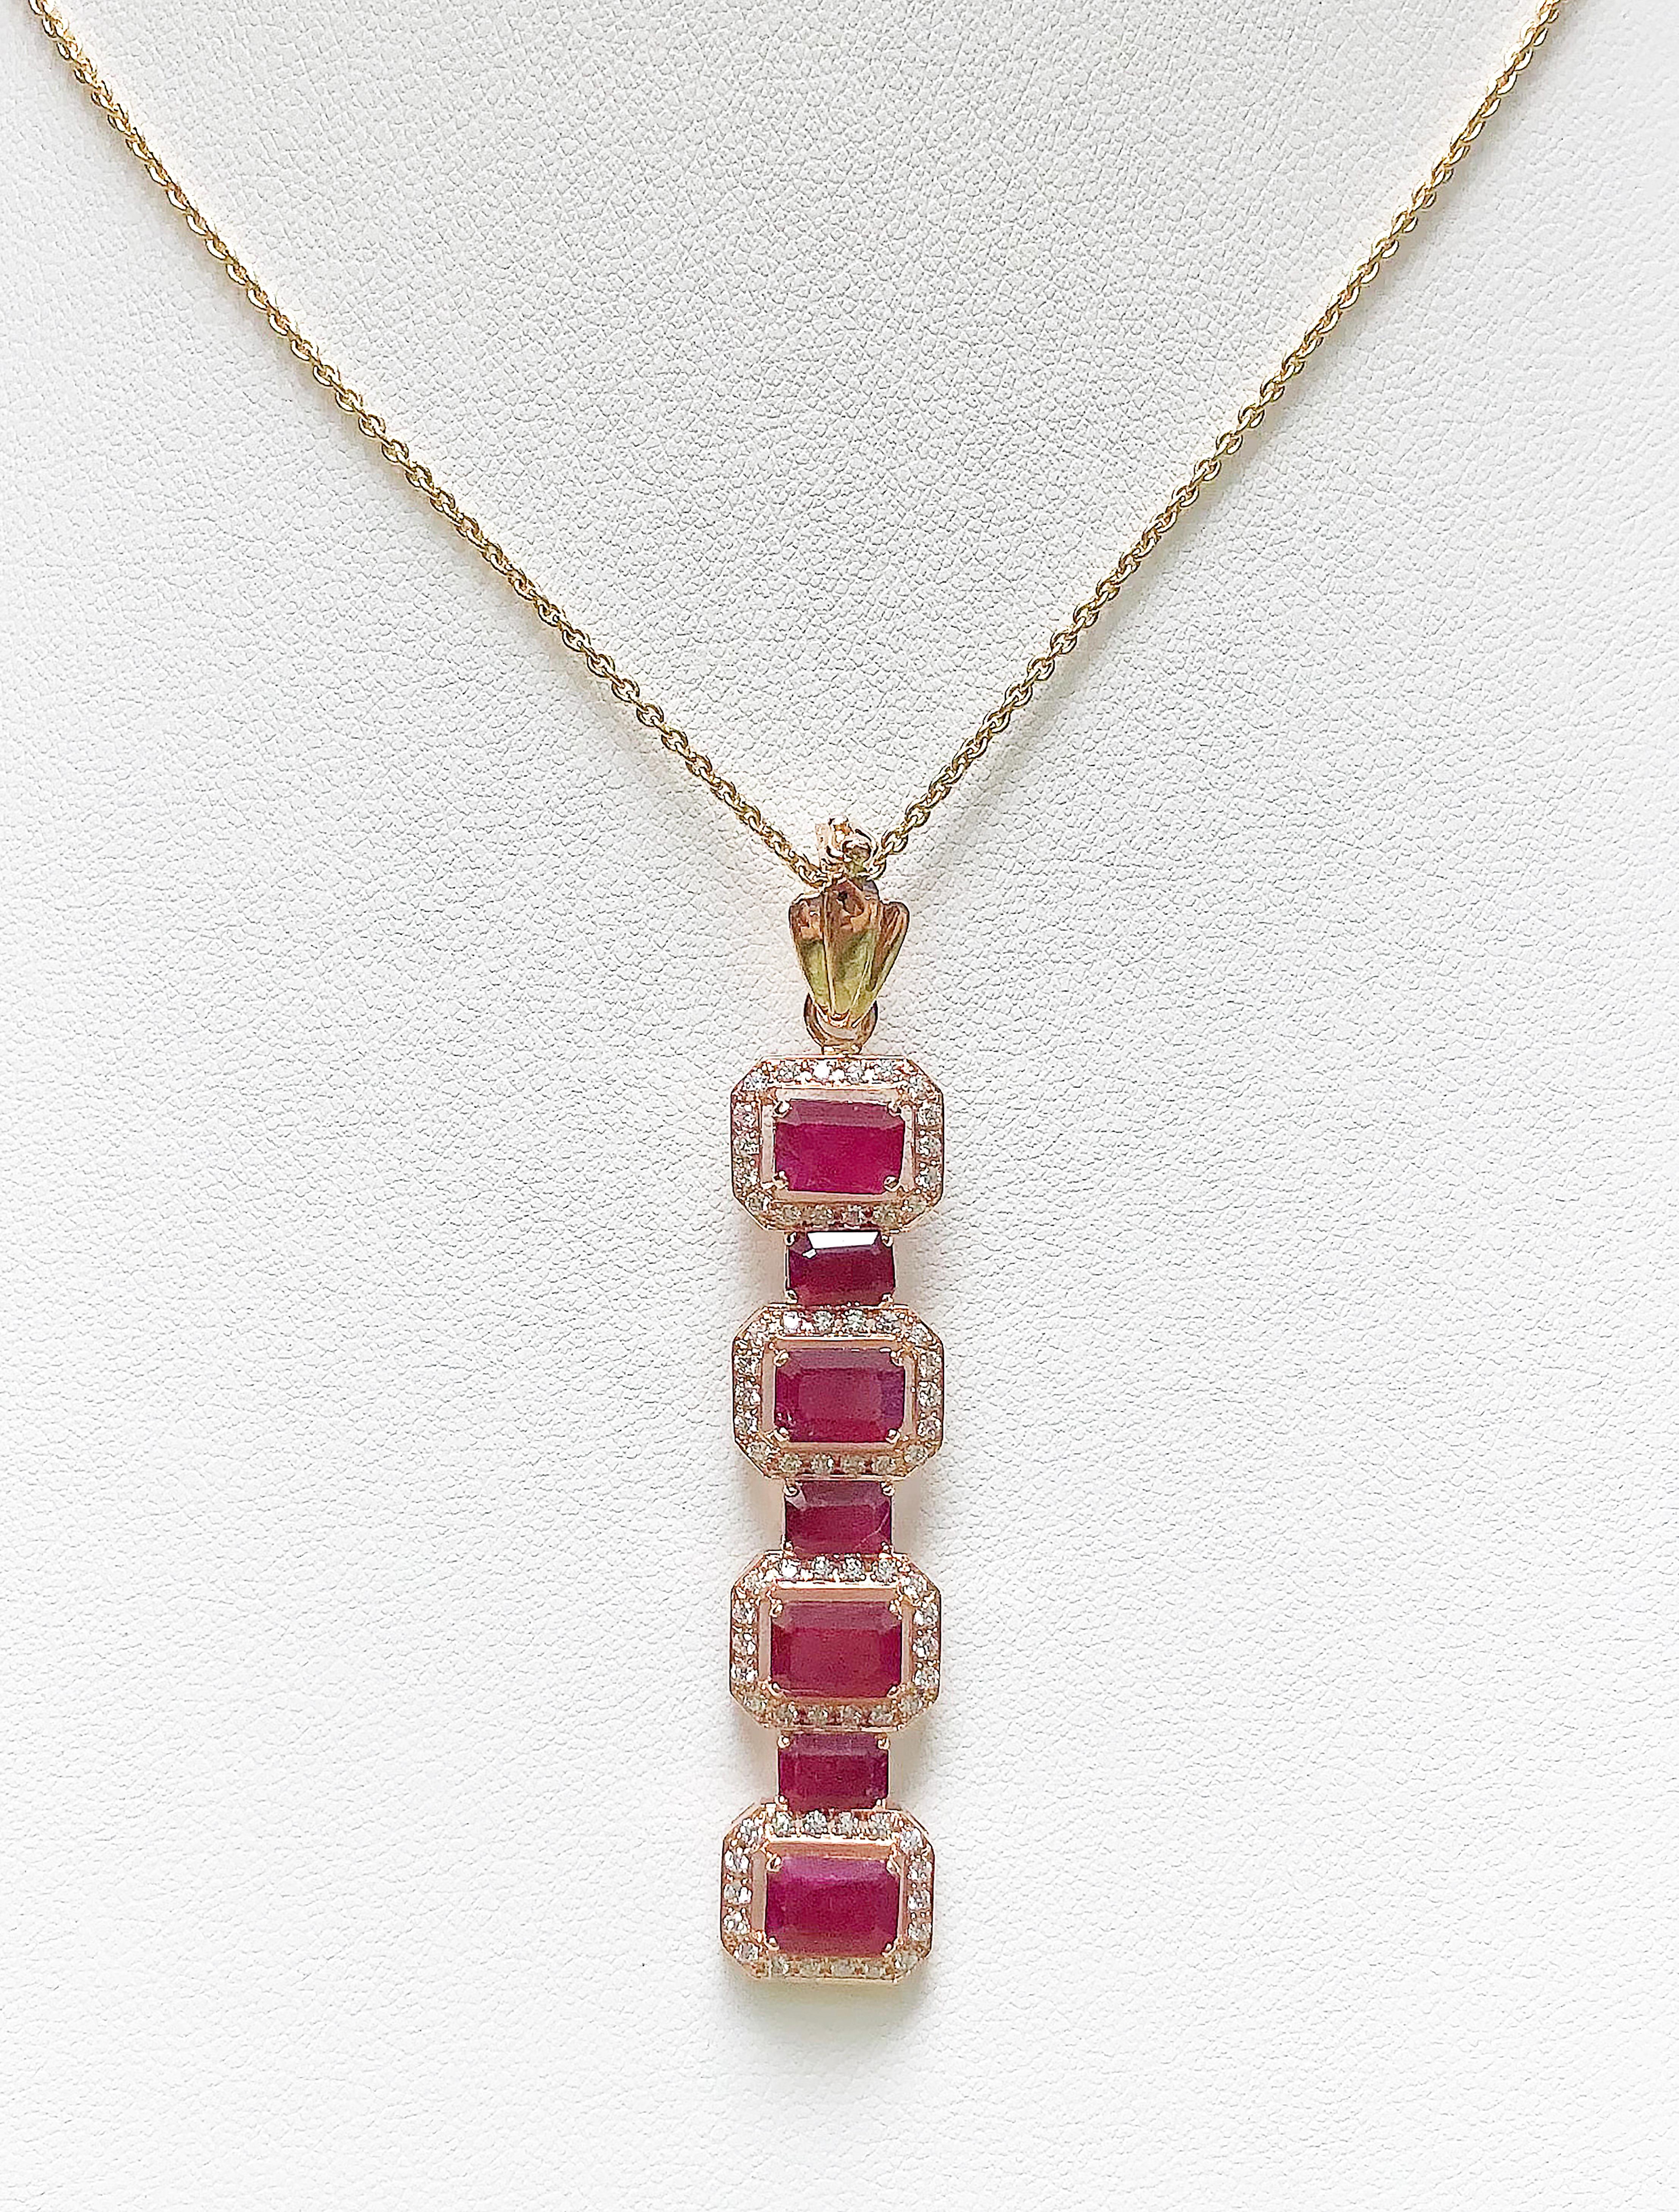 Ruby 6.32 carats with Diamond 0.58 carat Pendant set in 18 Karat Rose Gold Settings
(chain not included)

Width:  1.2 cm 
Length: 6.3 cm
Total Weight: 8.36 grams

